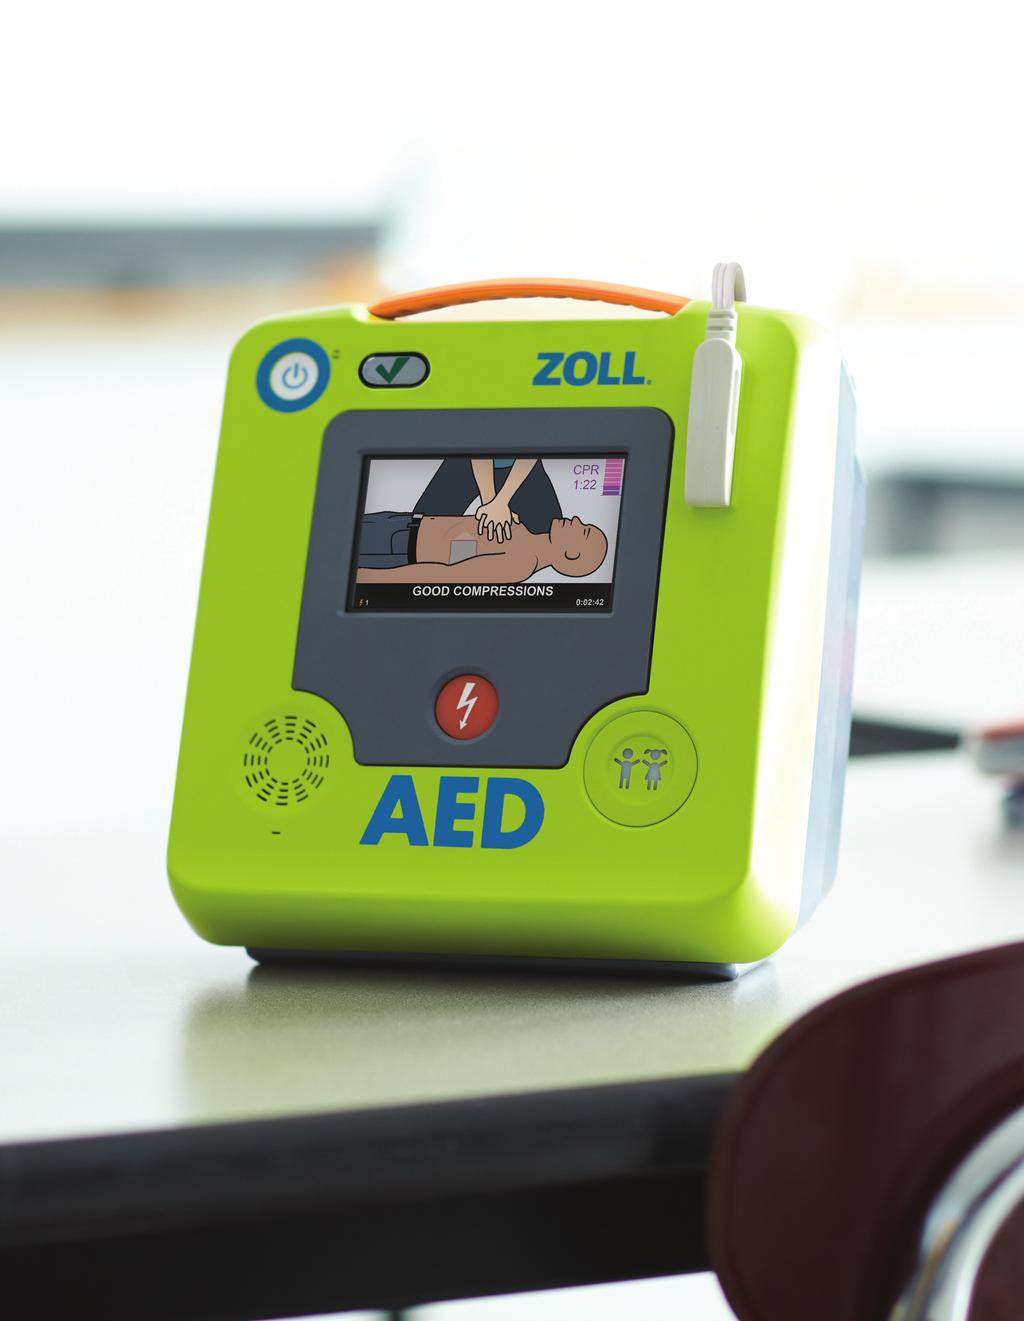 THE AED THAT